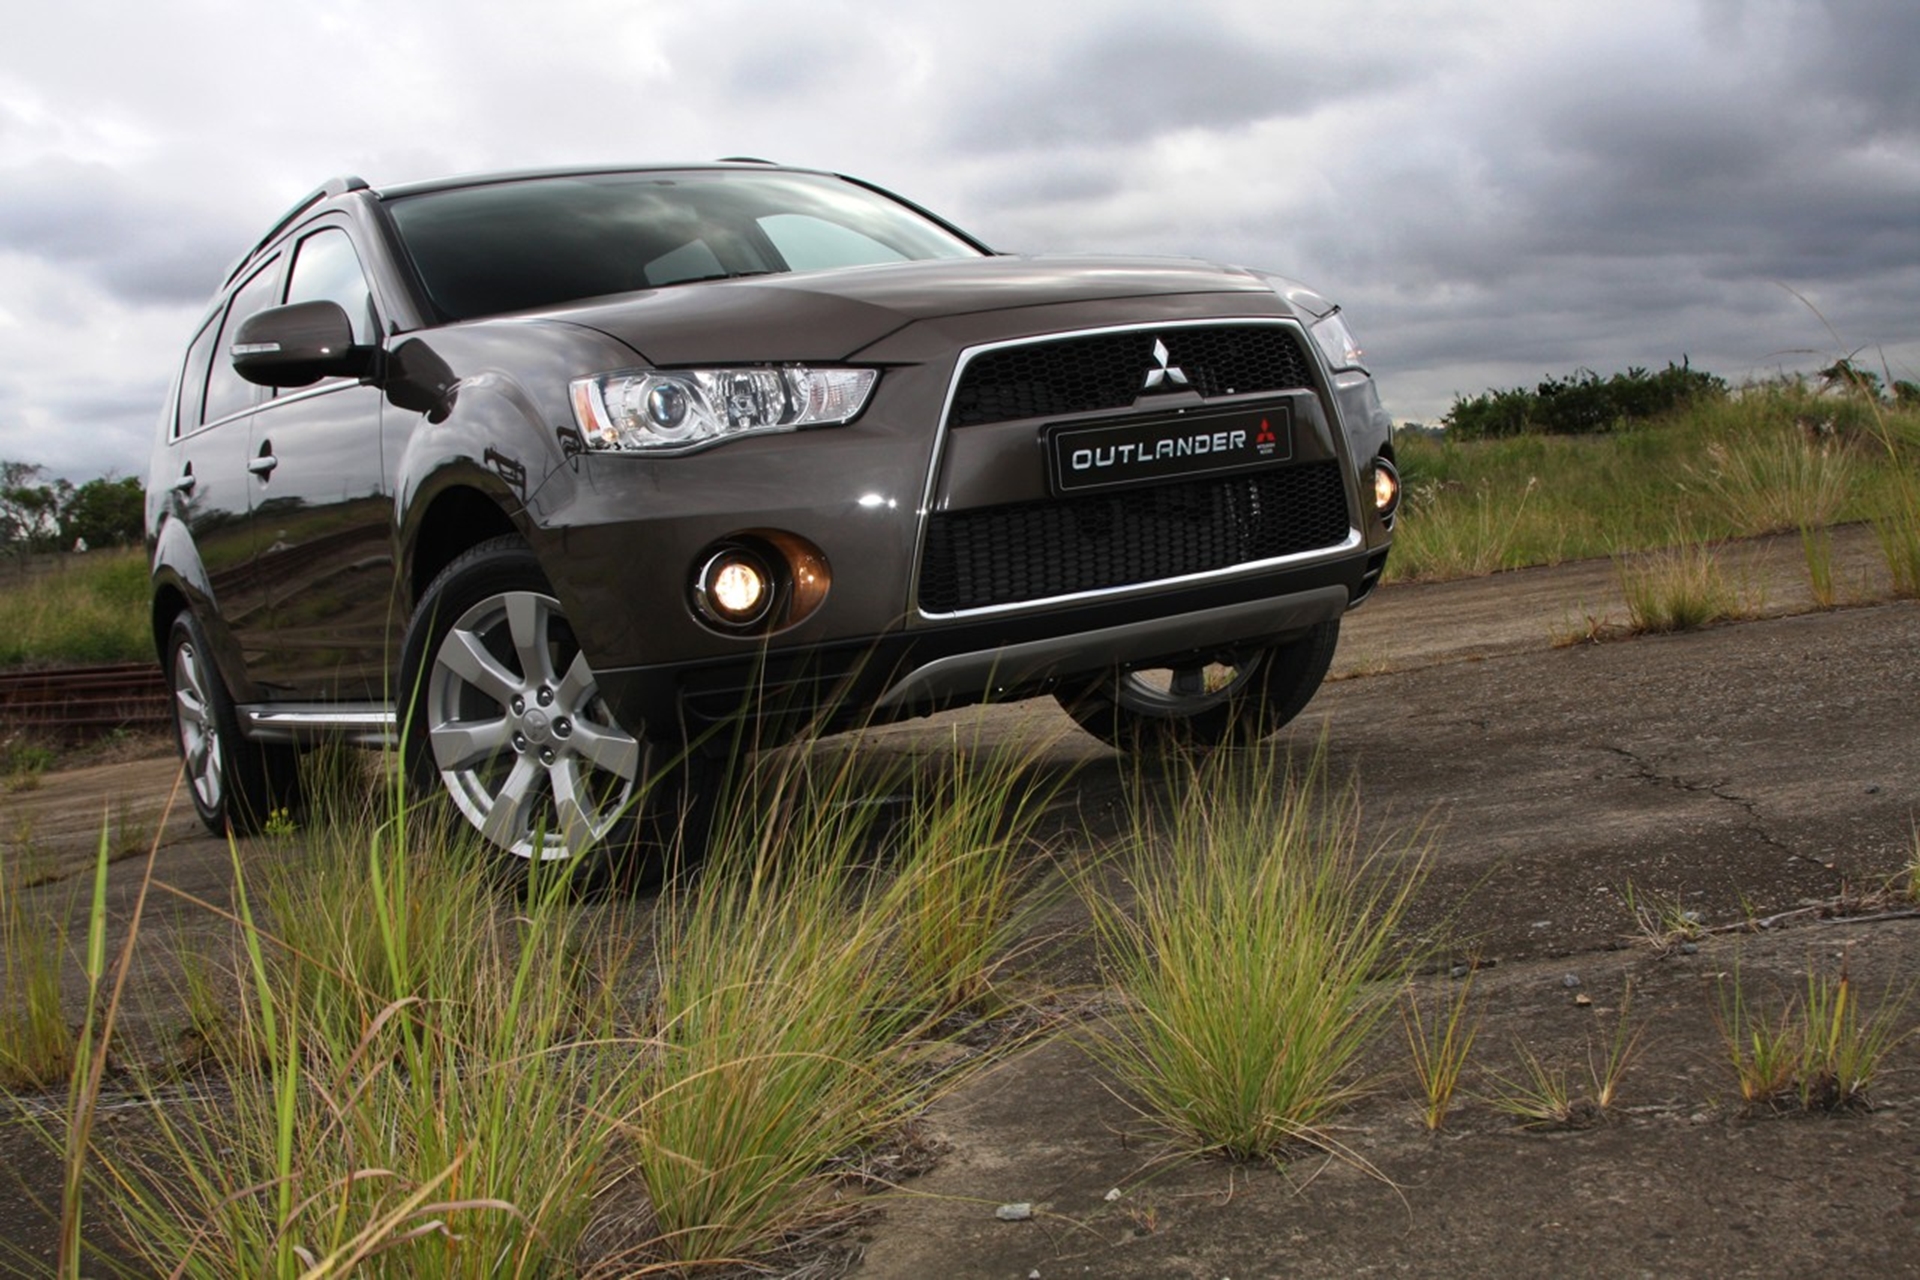 MITSUBISHI SOUTH AFRICA INTRODUCES VALUE-FOR-MONEY ADDITION TO OUTLANDER RANGE